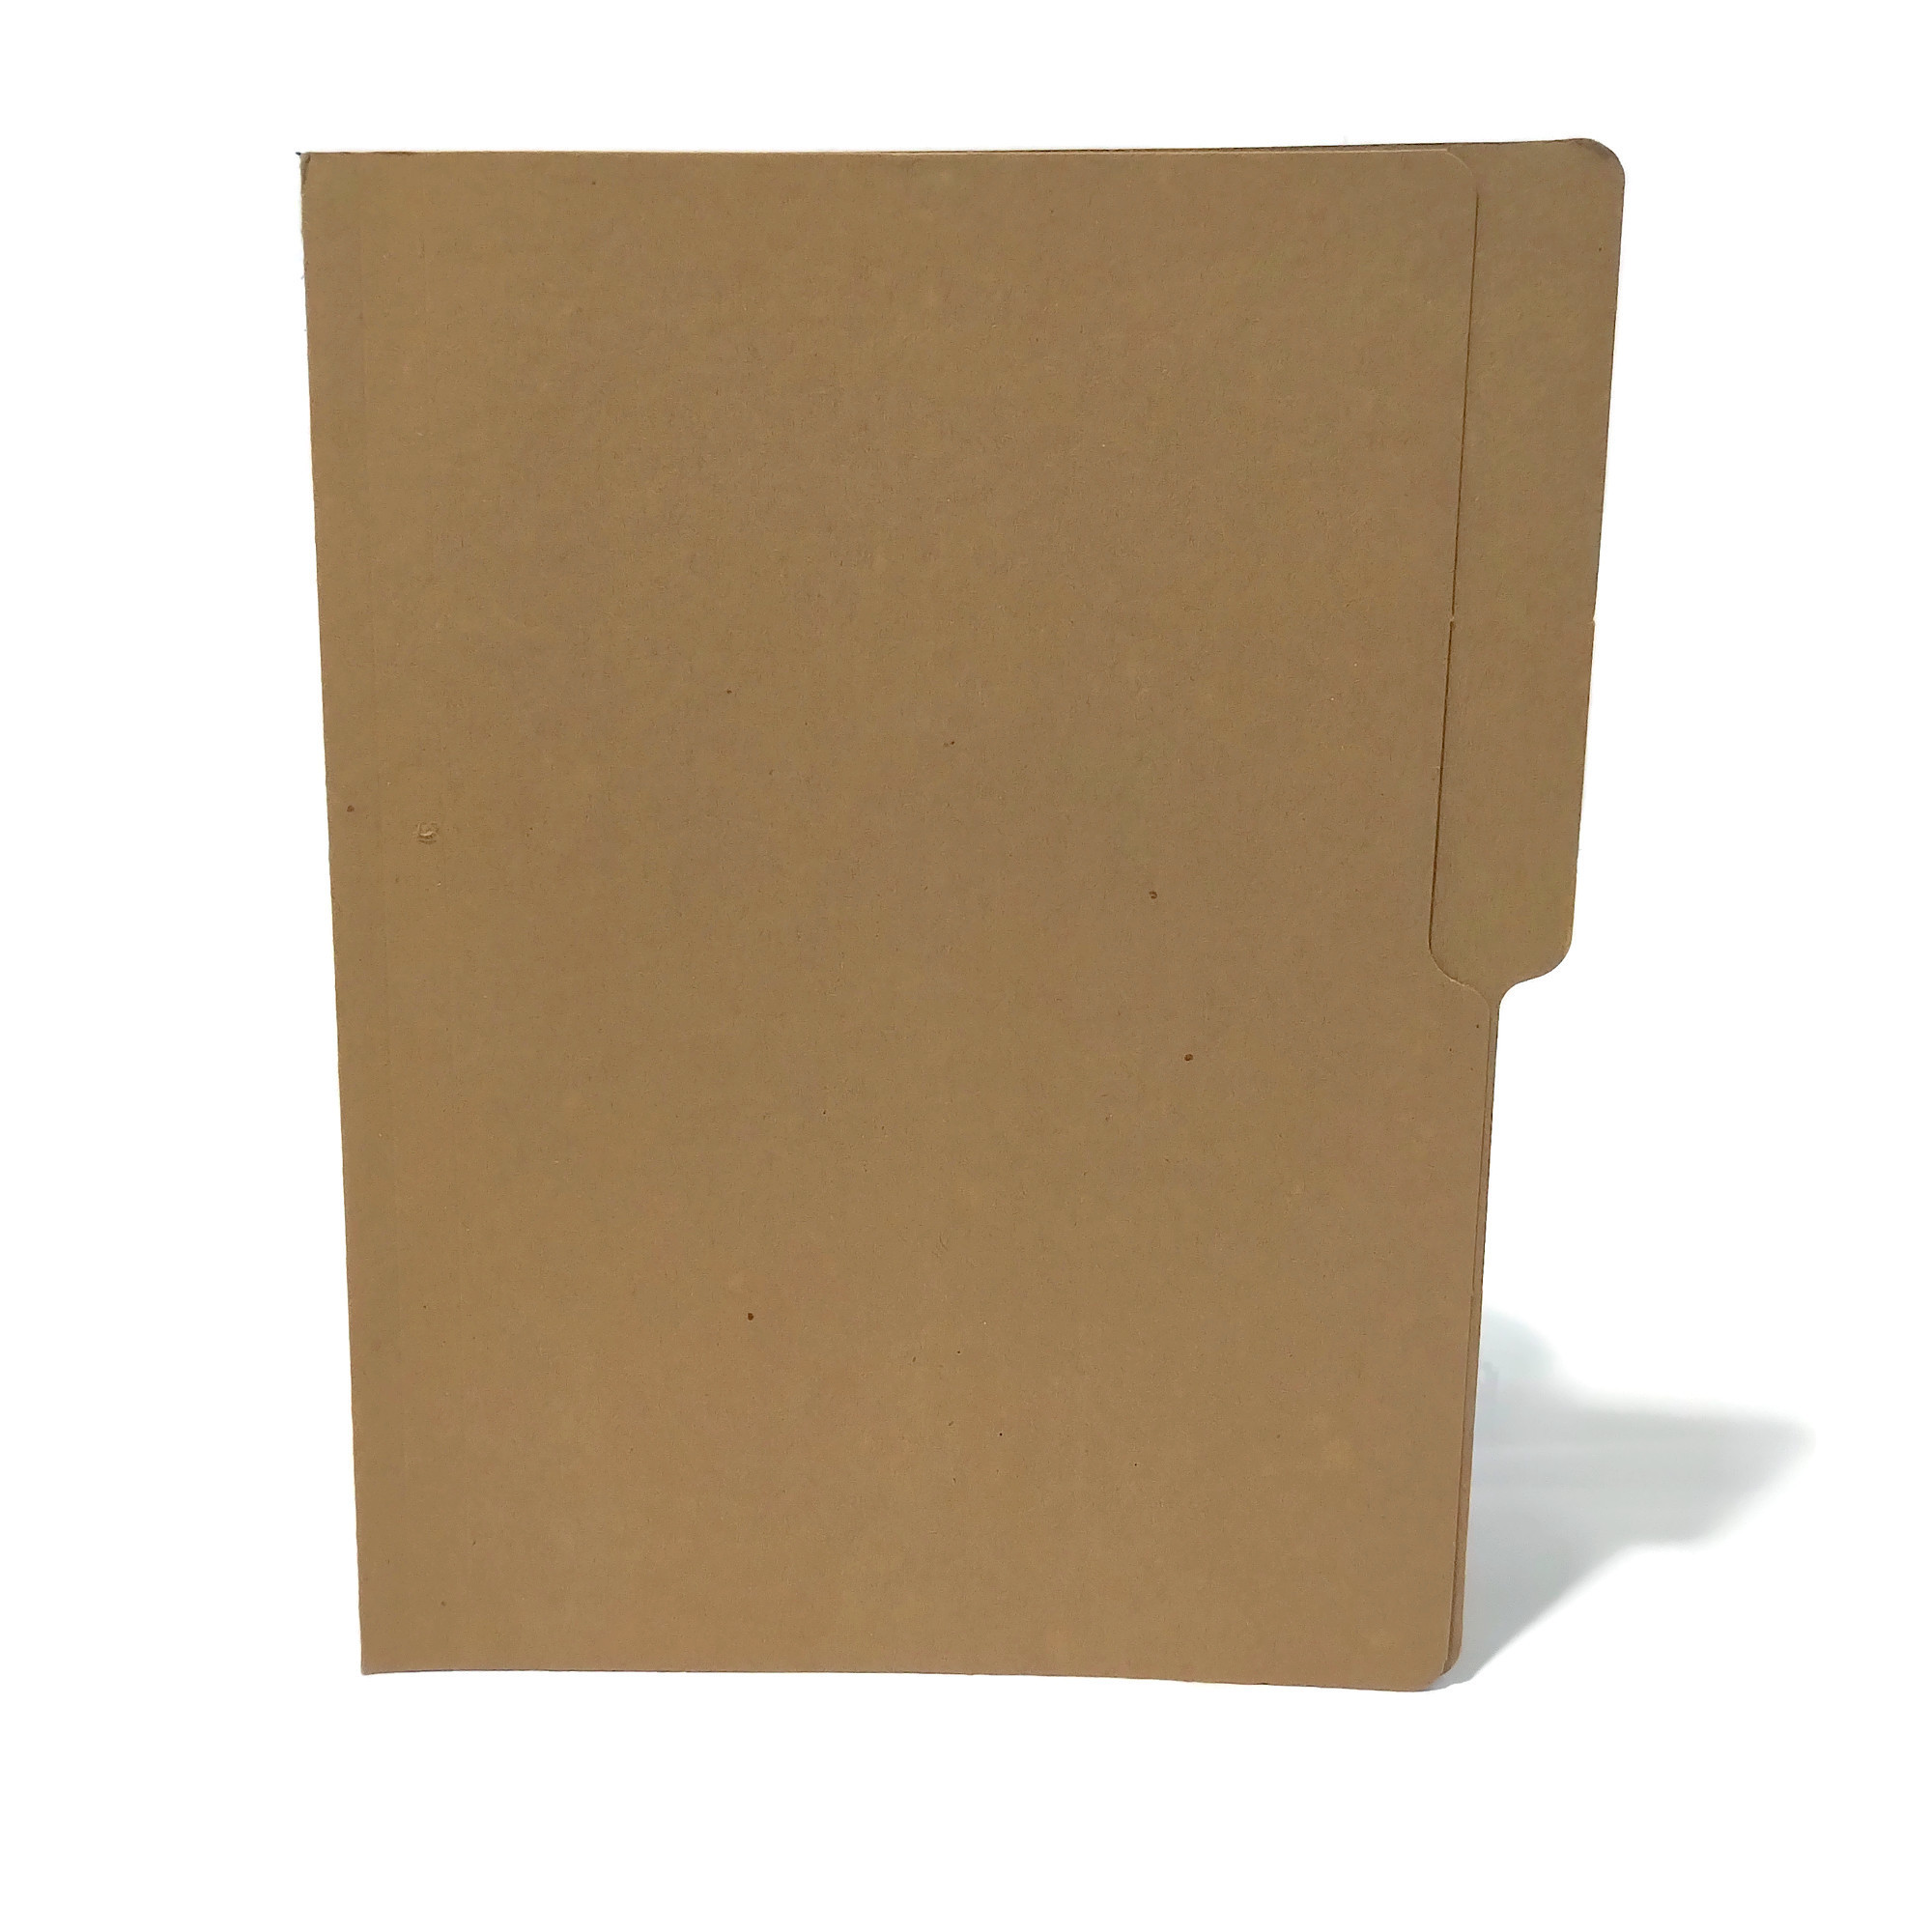 Brown Folder - Supplies 24/7 Delivery